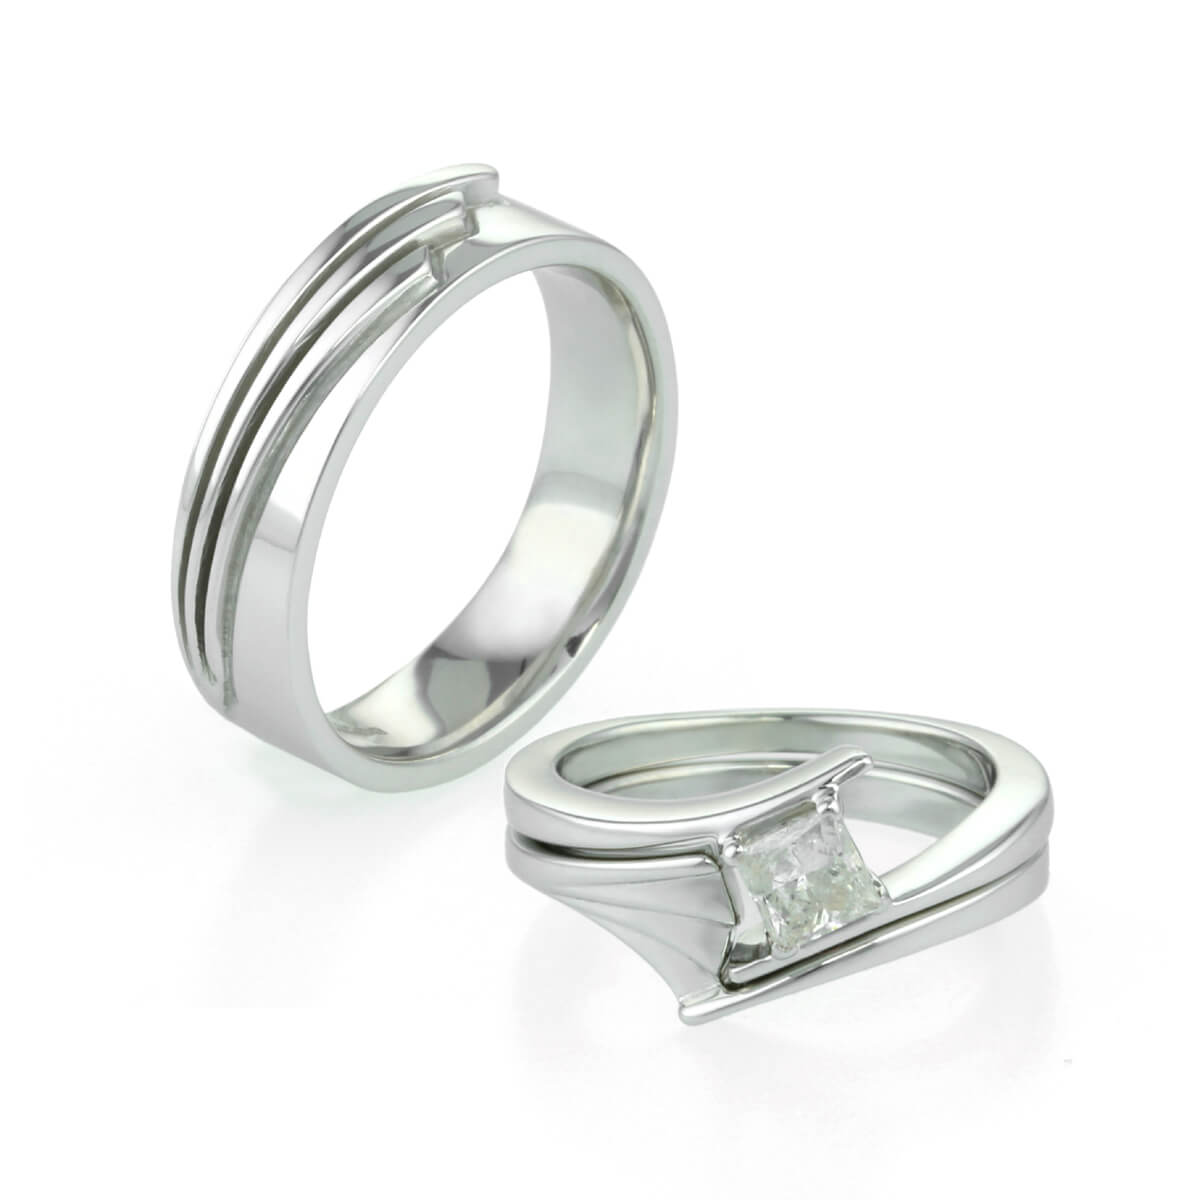 ladies and gents art deco inspired wedding rings